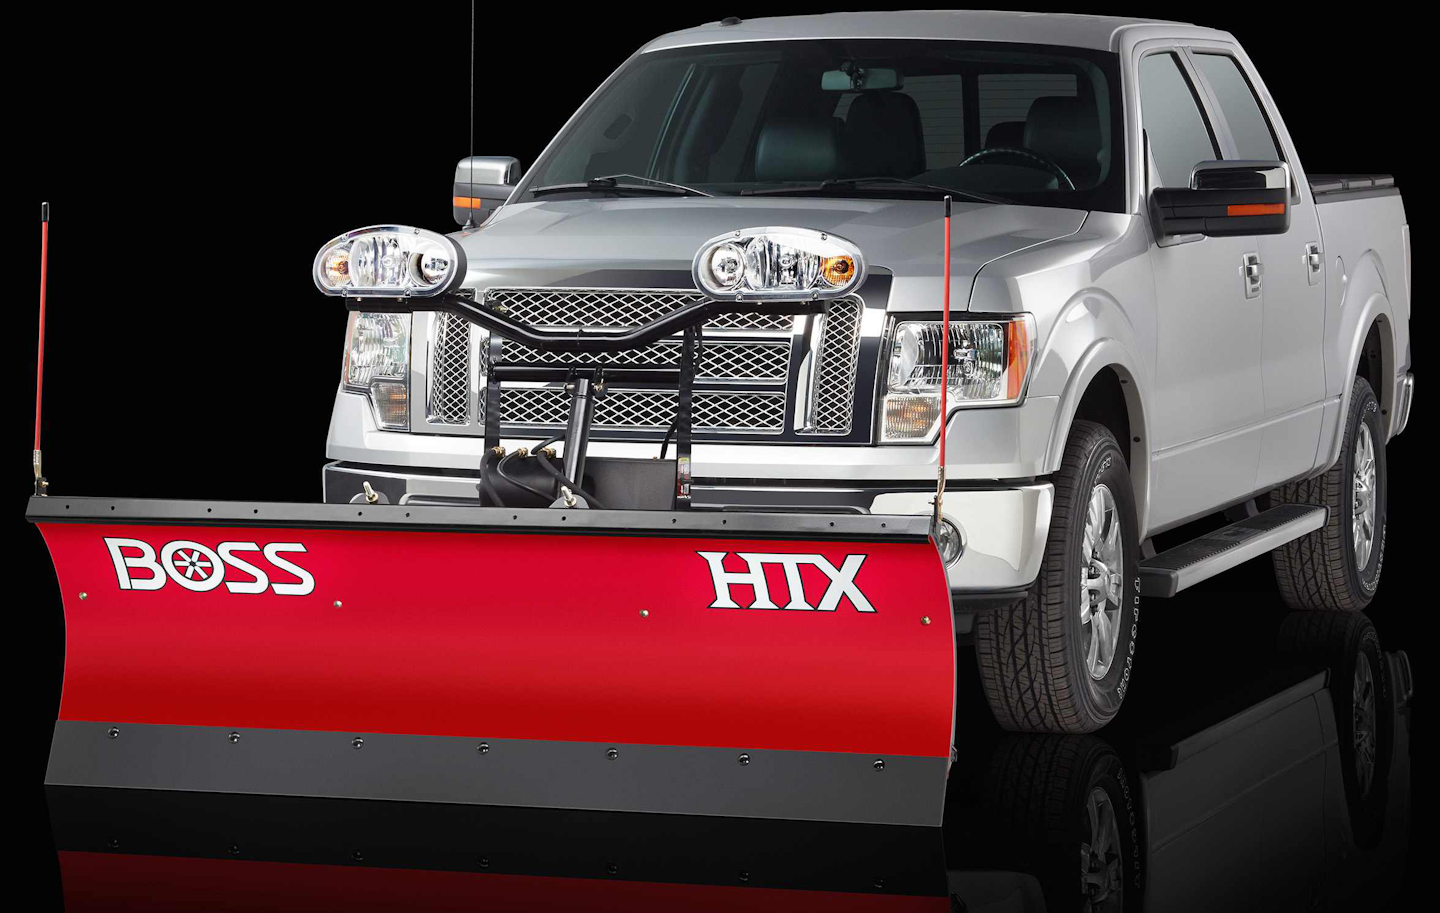 Boss Snowplow Launches Htx Straight Blade Plow Series Total Landscape